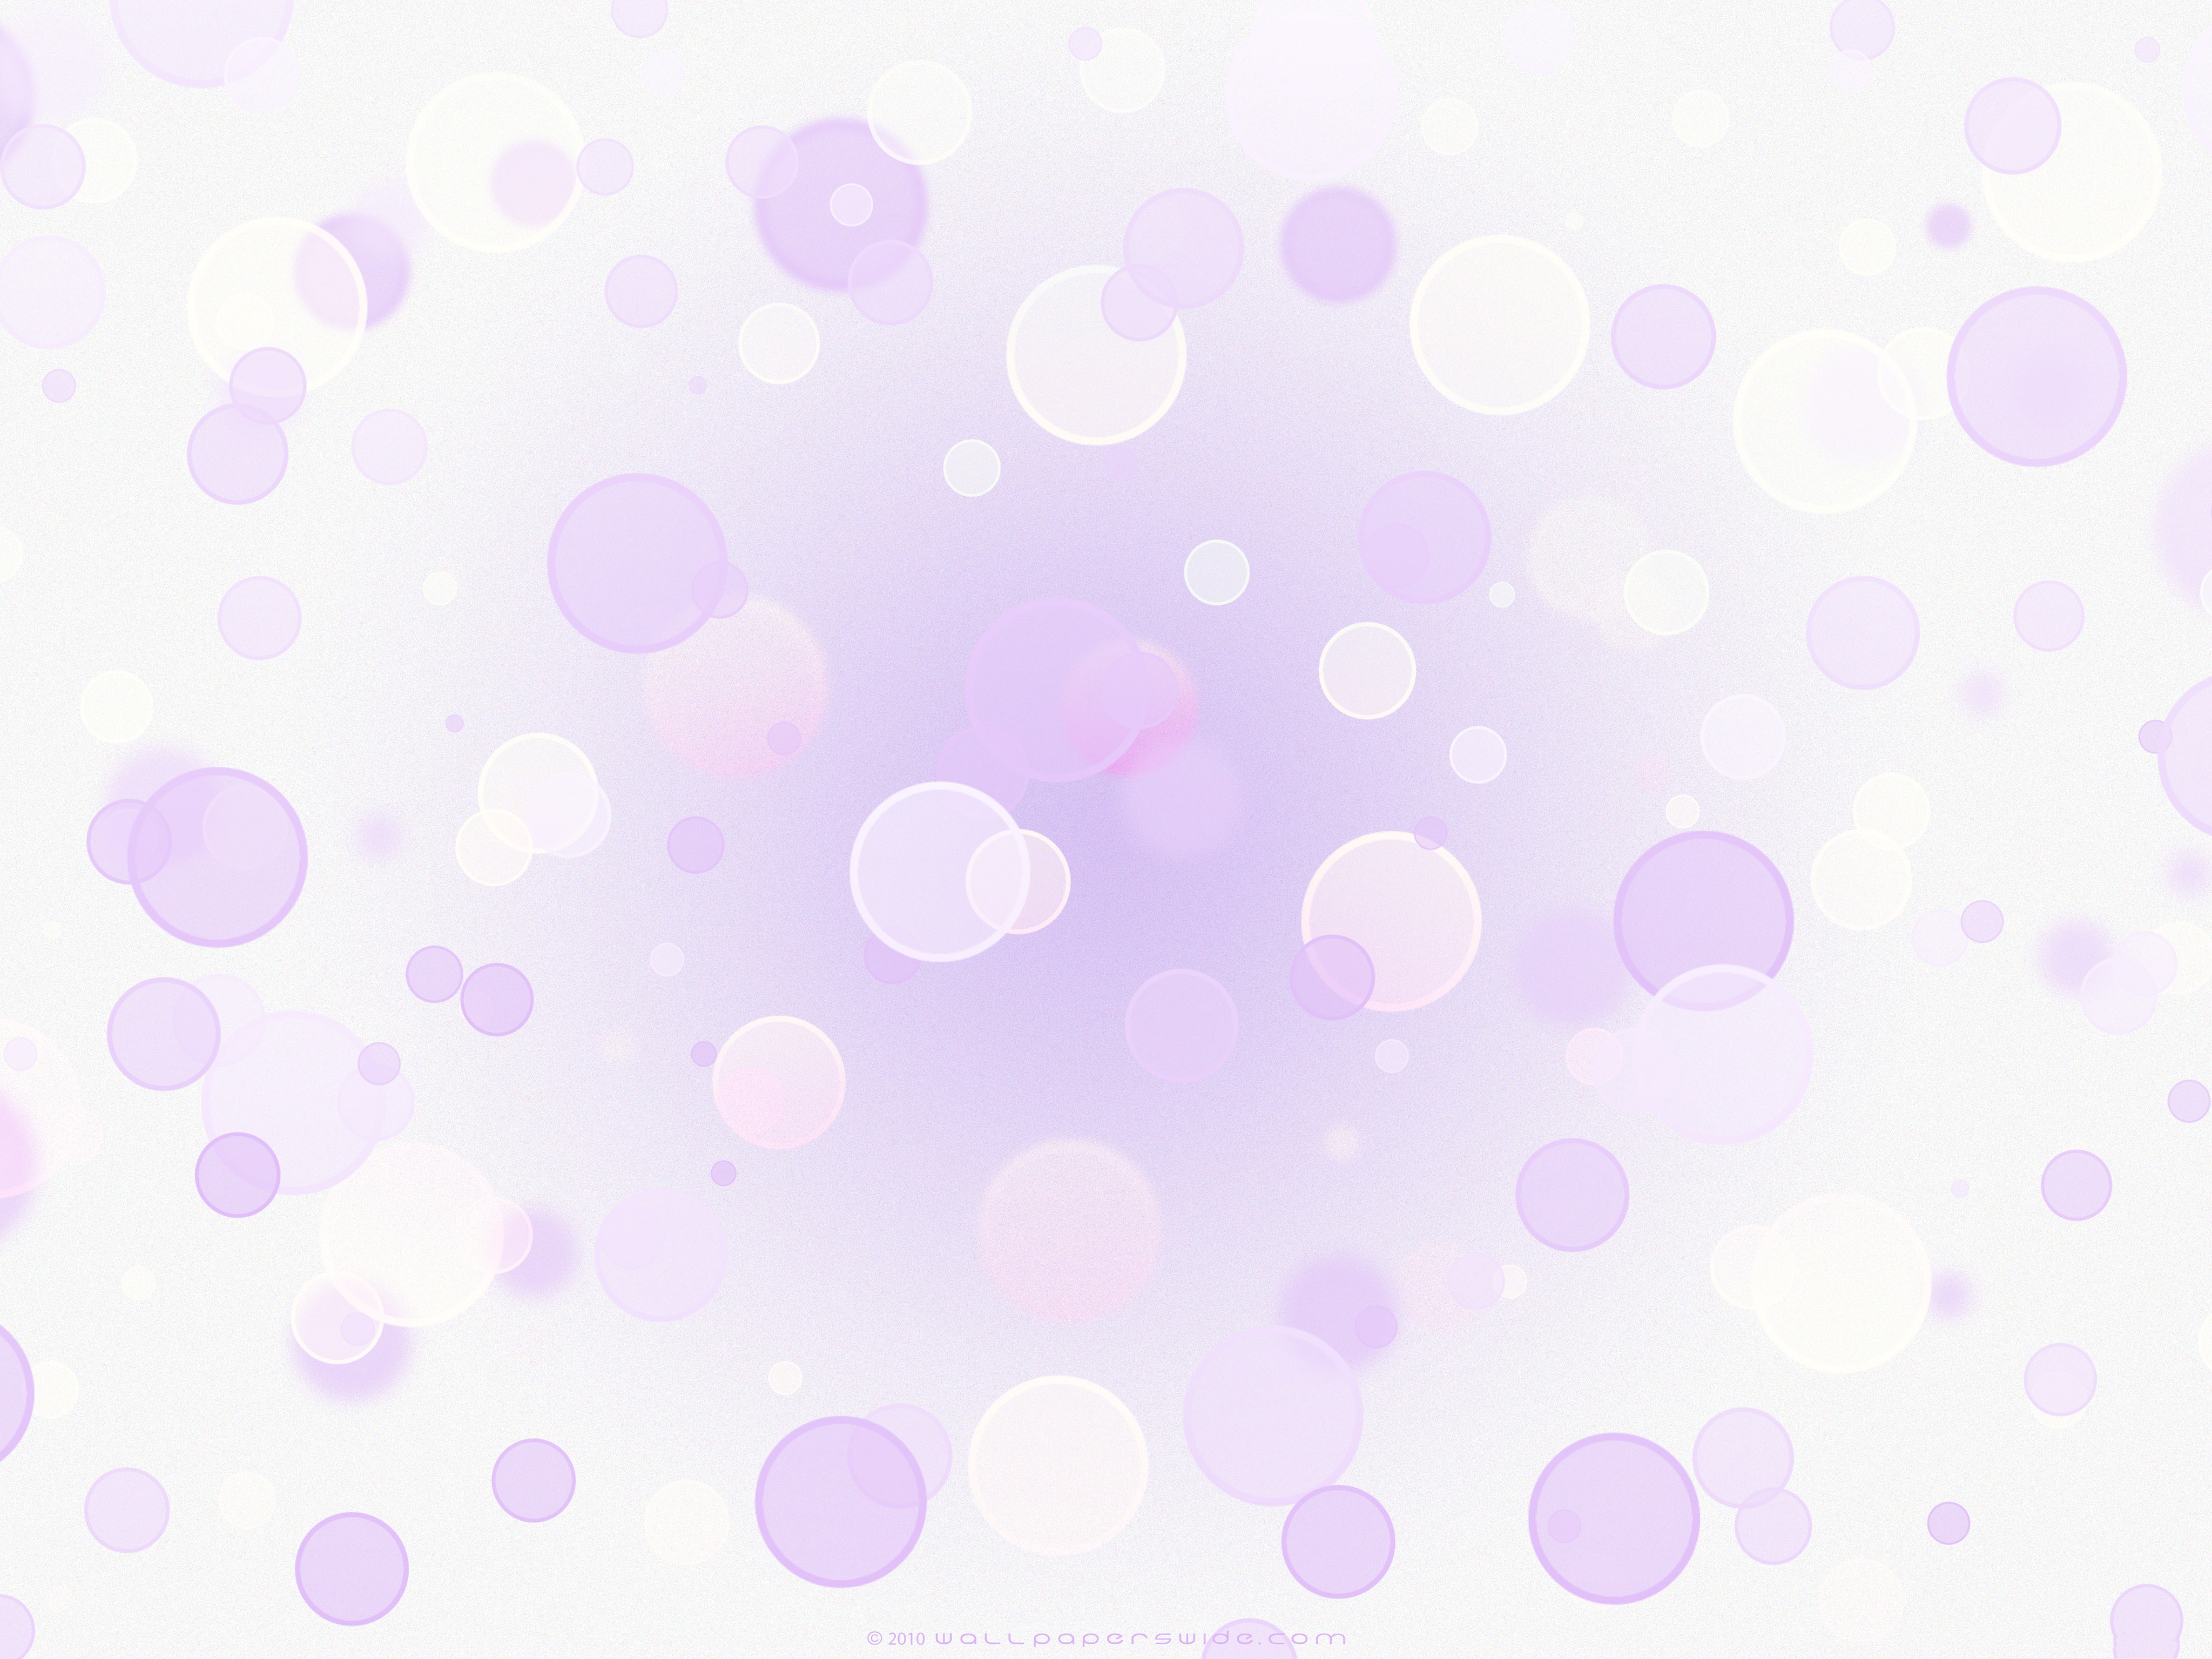 High Quality Wide Wallpaper Purple Circles On White